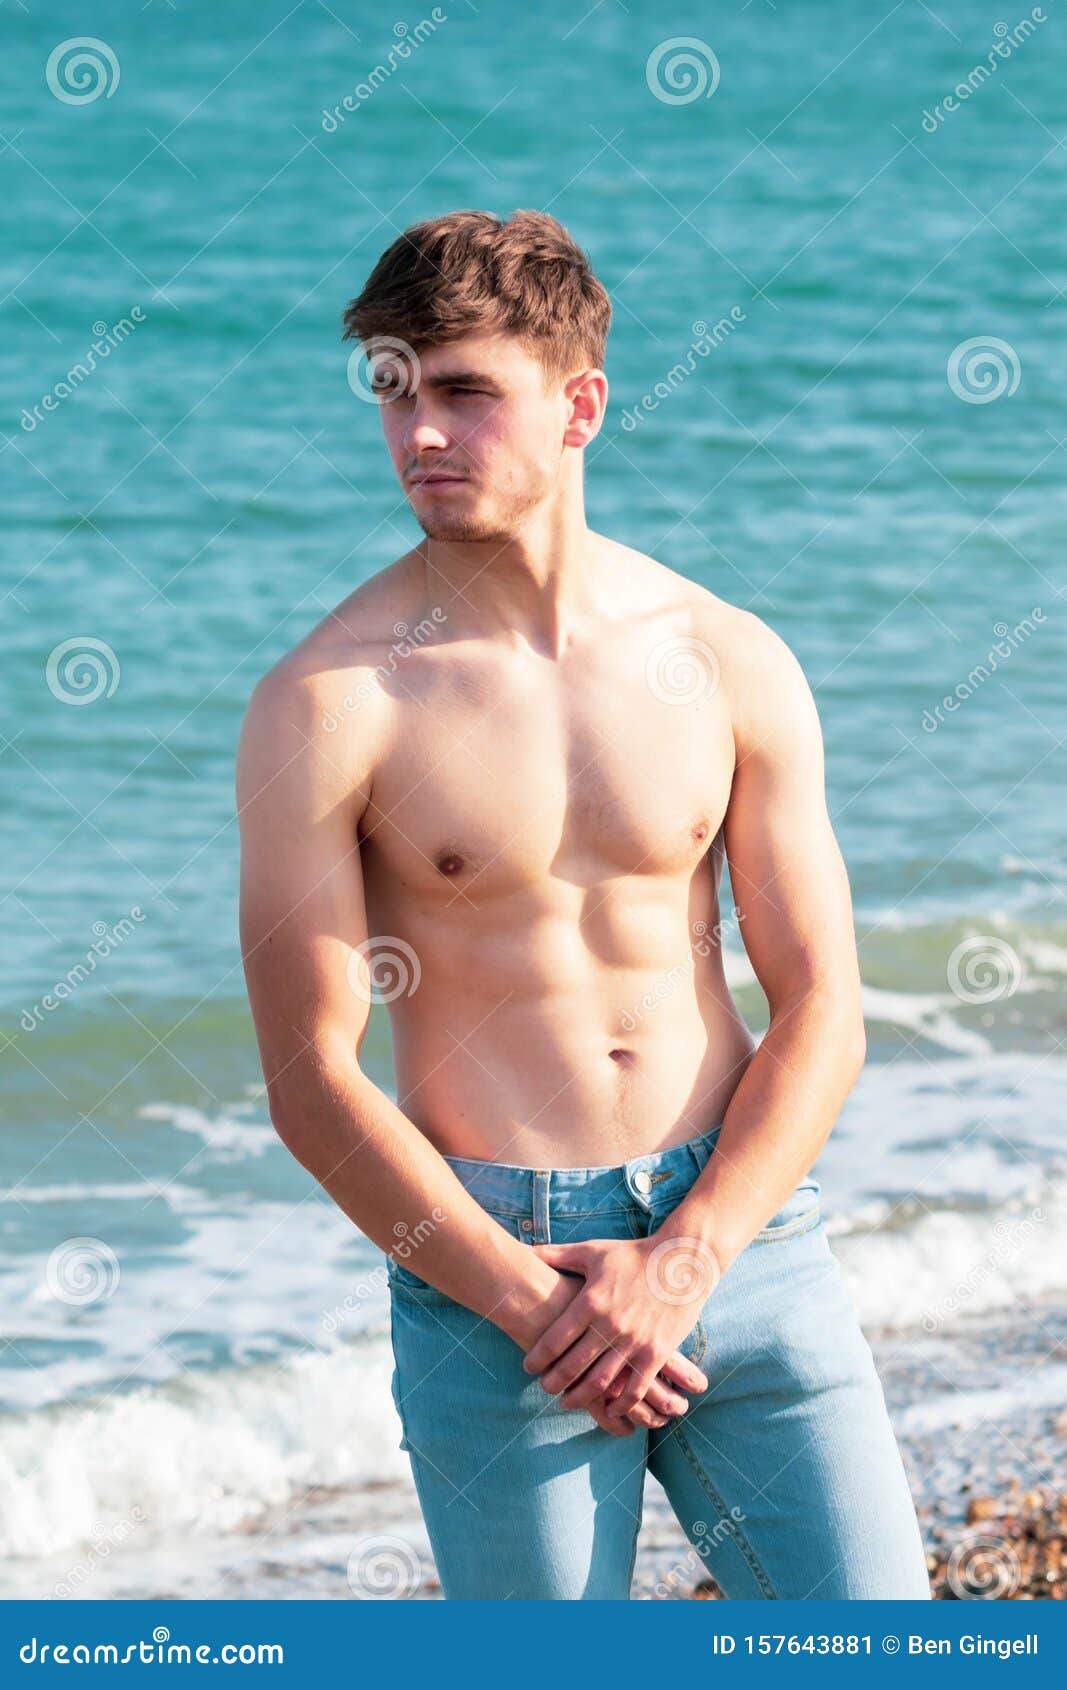 Shirtless on a beach stock image. Image of muscles, young - 157643881